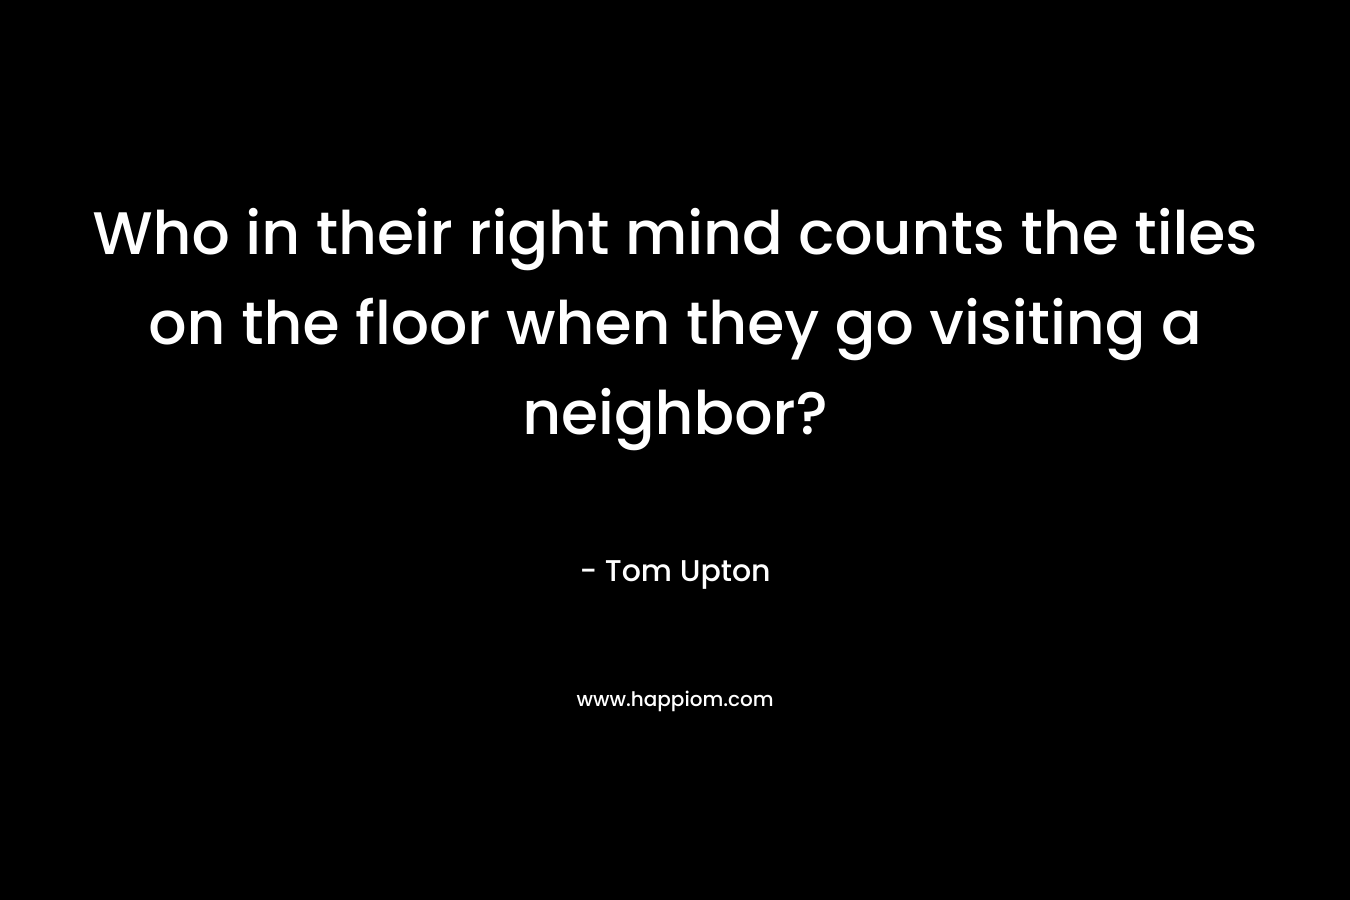 Who in their right mind counts the tiles on the floor when they go visiting a neighbor? – Tom Upton